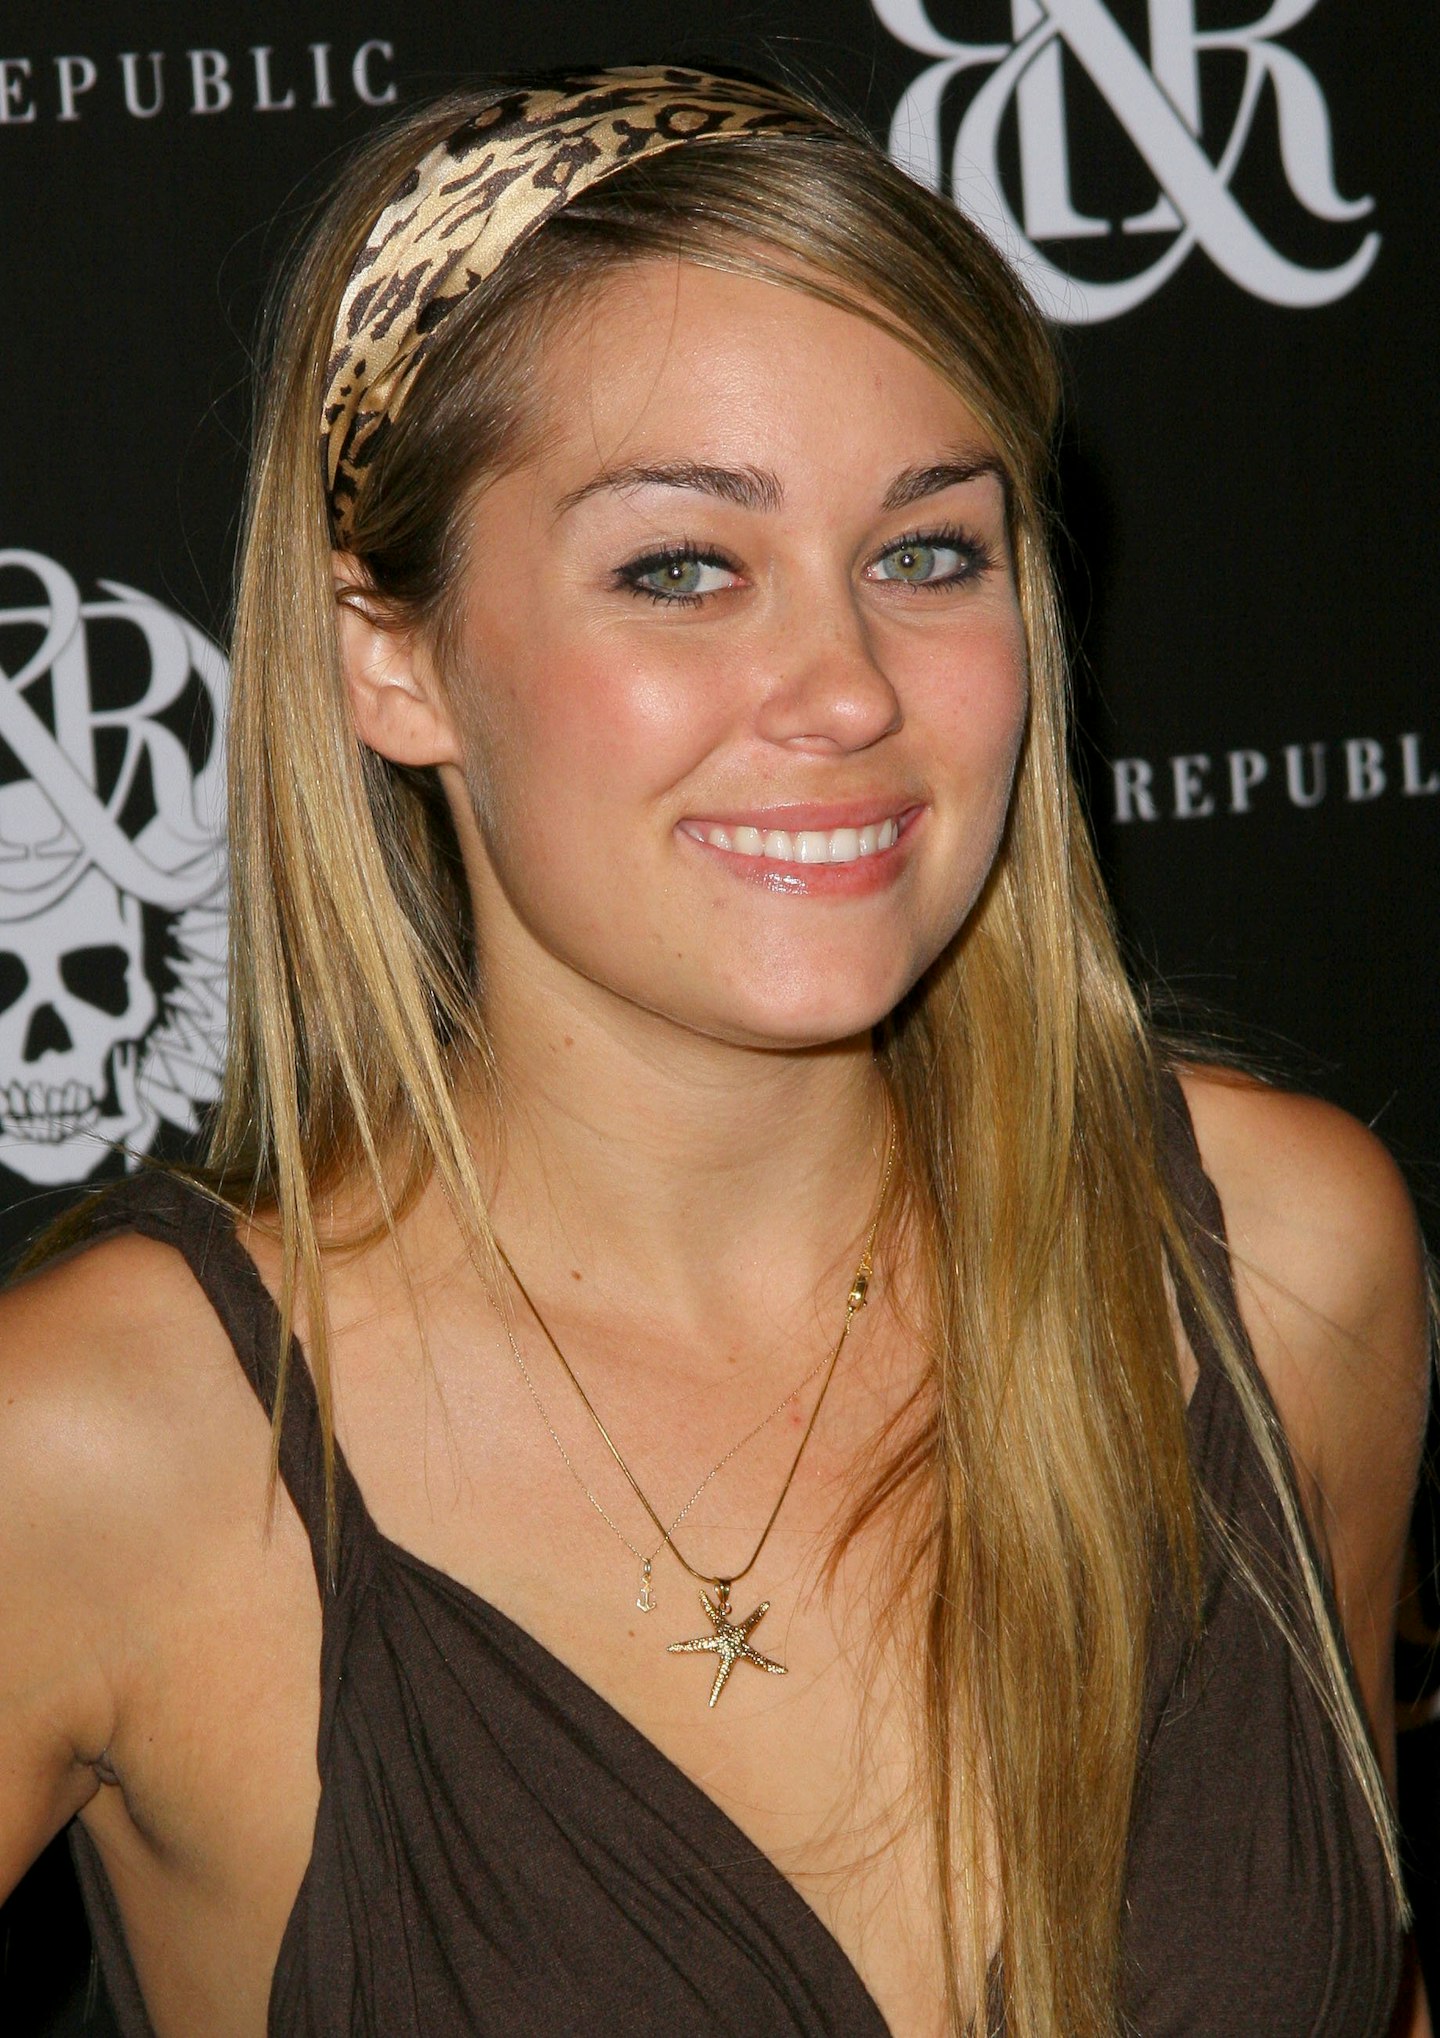 The Hills star Lauren Conrad goes to People's Revolution clothing